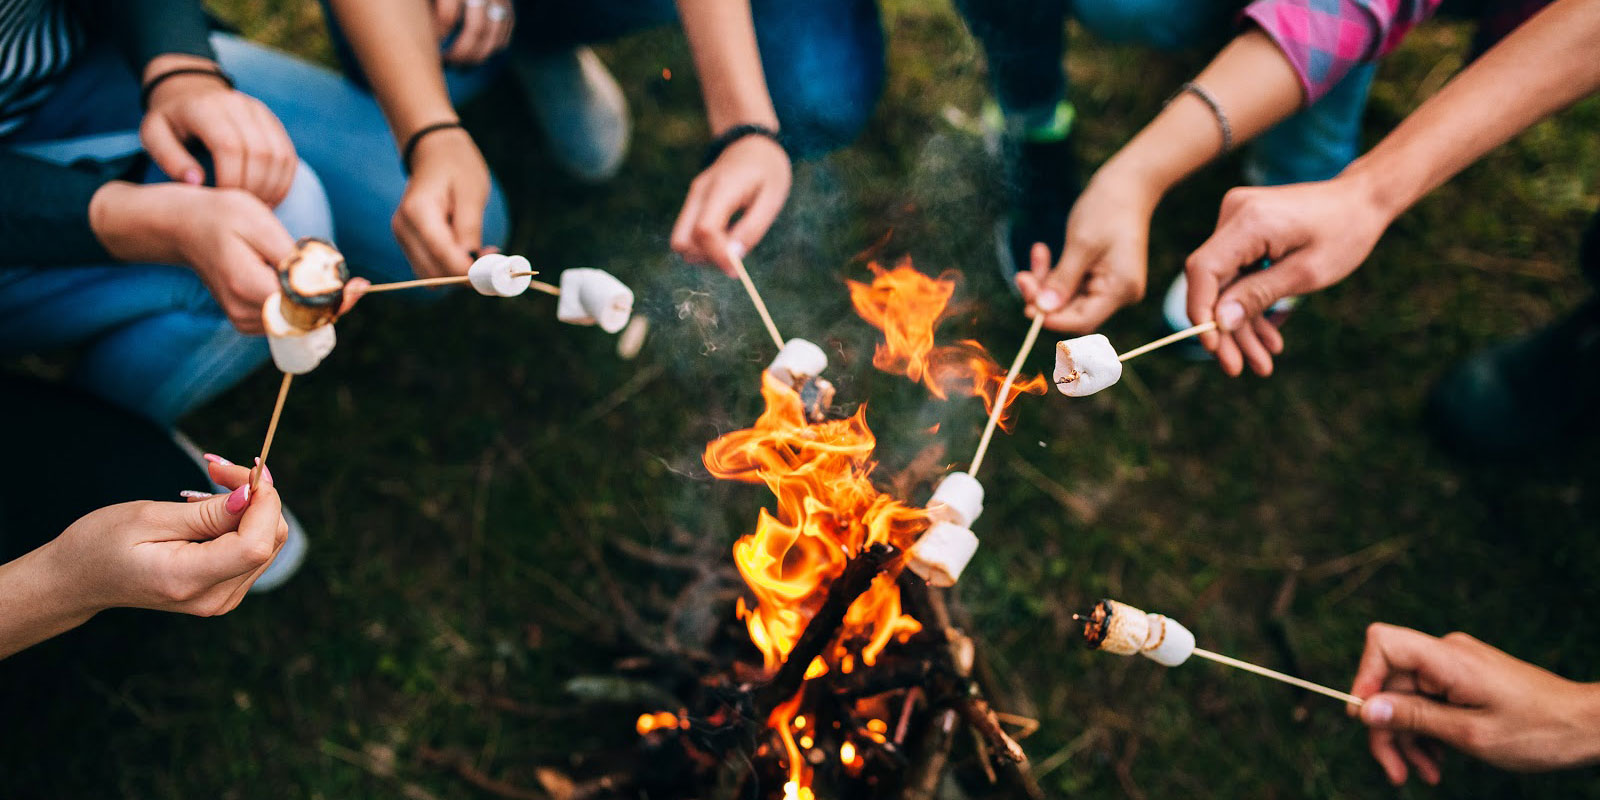 Spending time outdoors during summer allergies roasting marshmallows